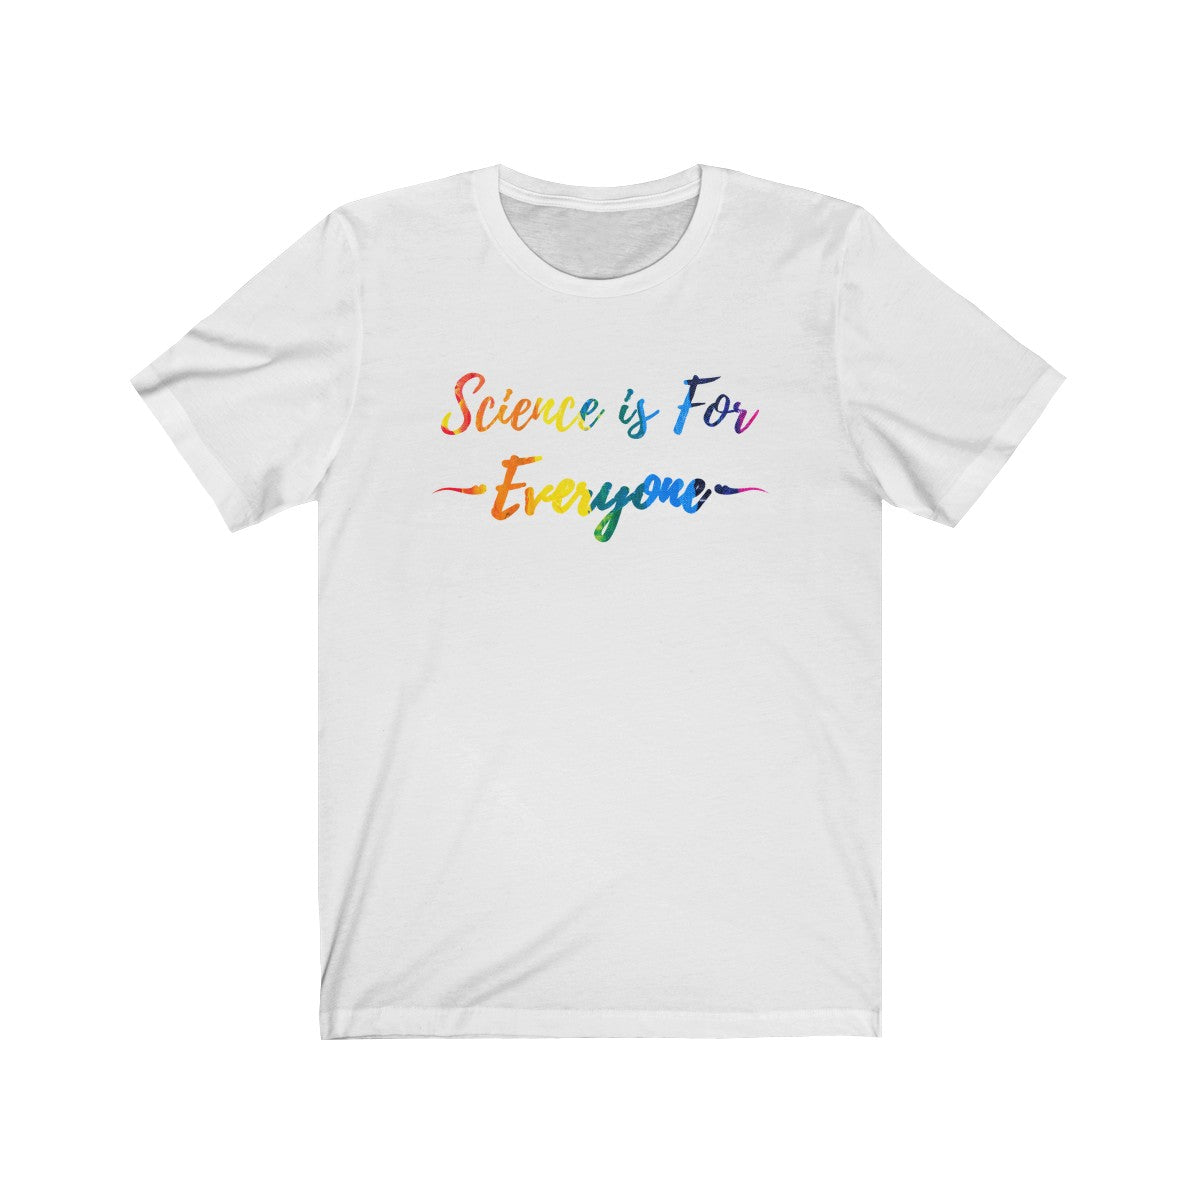 Science is for Everyone - Cotton Tee